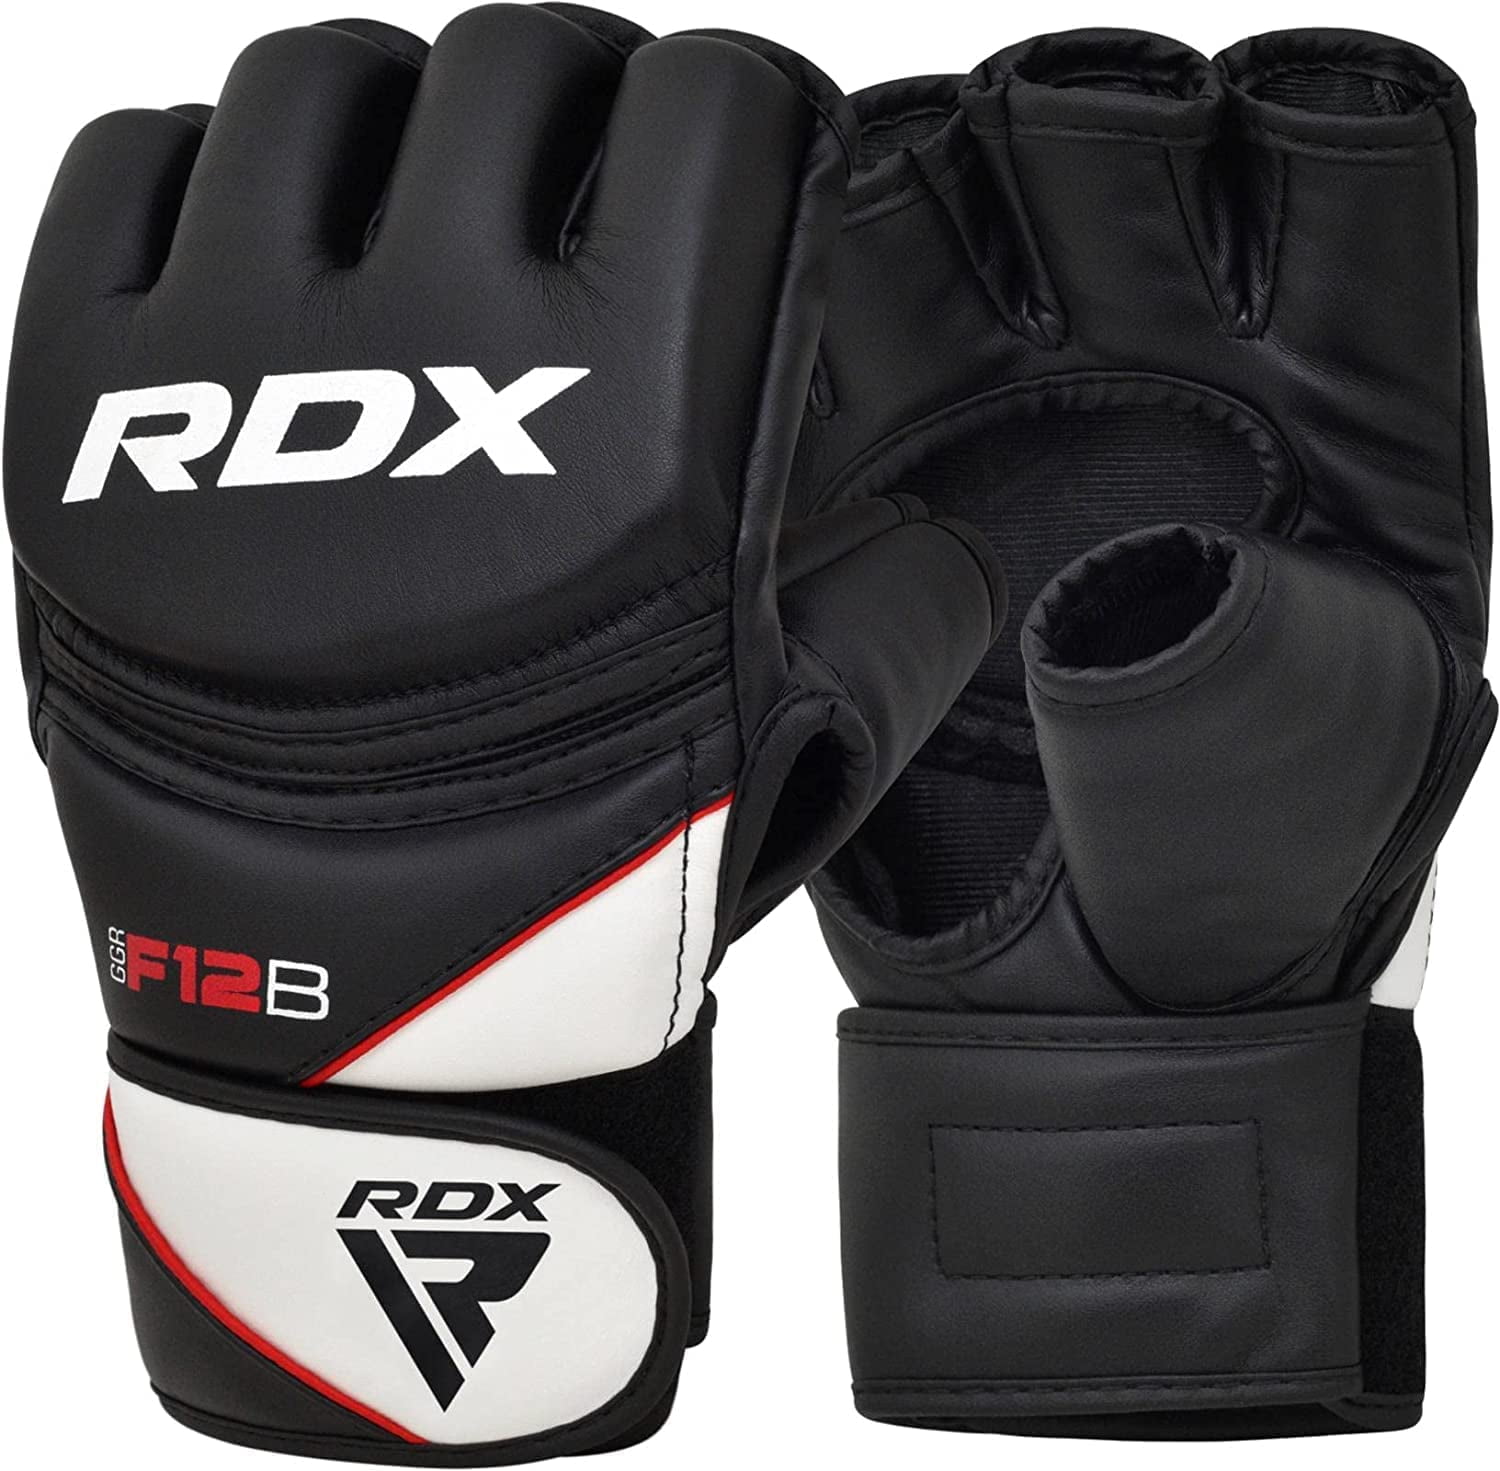 AZ New Pro Style MMA Grappling Boxing Training/Competition Gloves-1498 